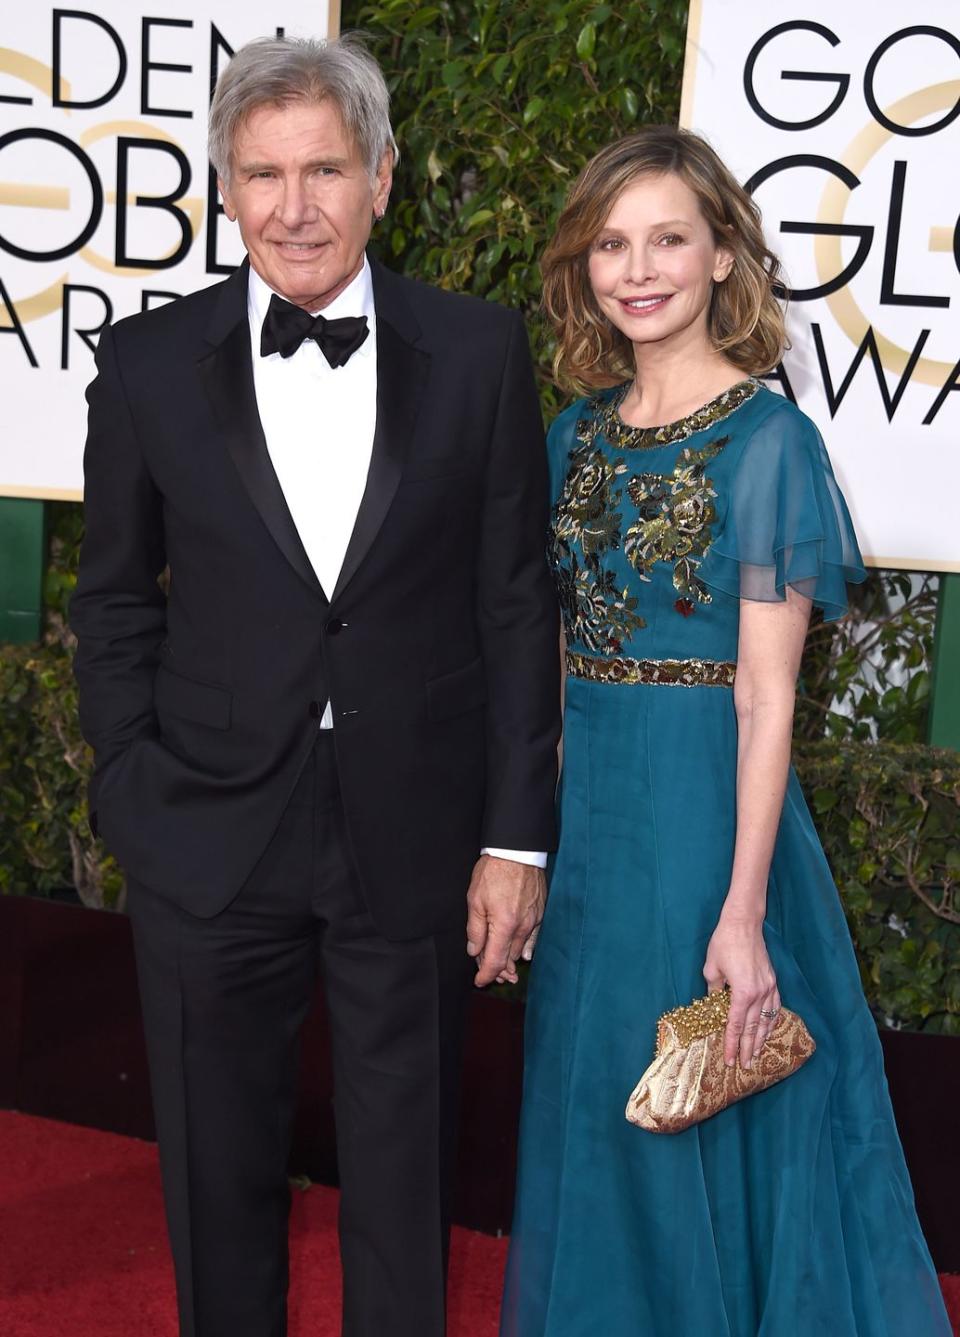 Harrison Ford, 77, and Calista Flockhart, 55